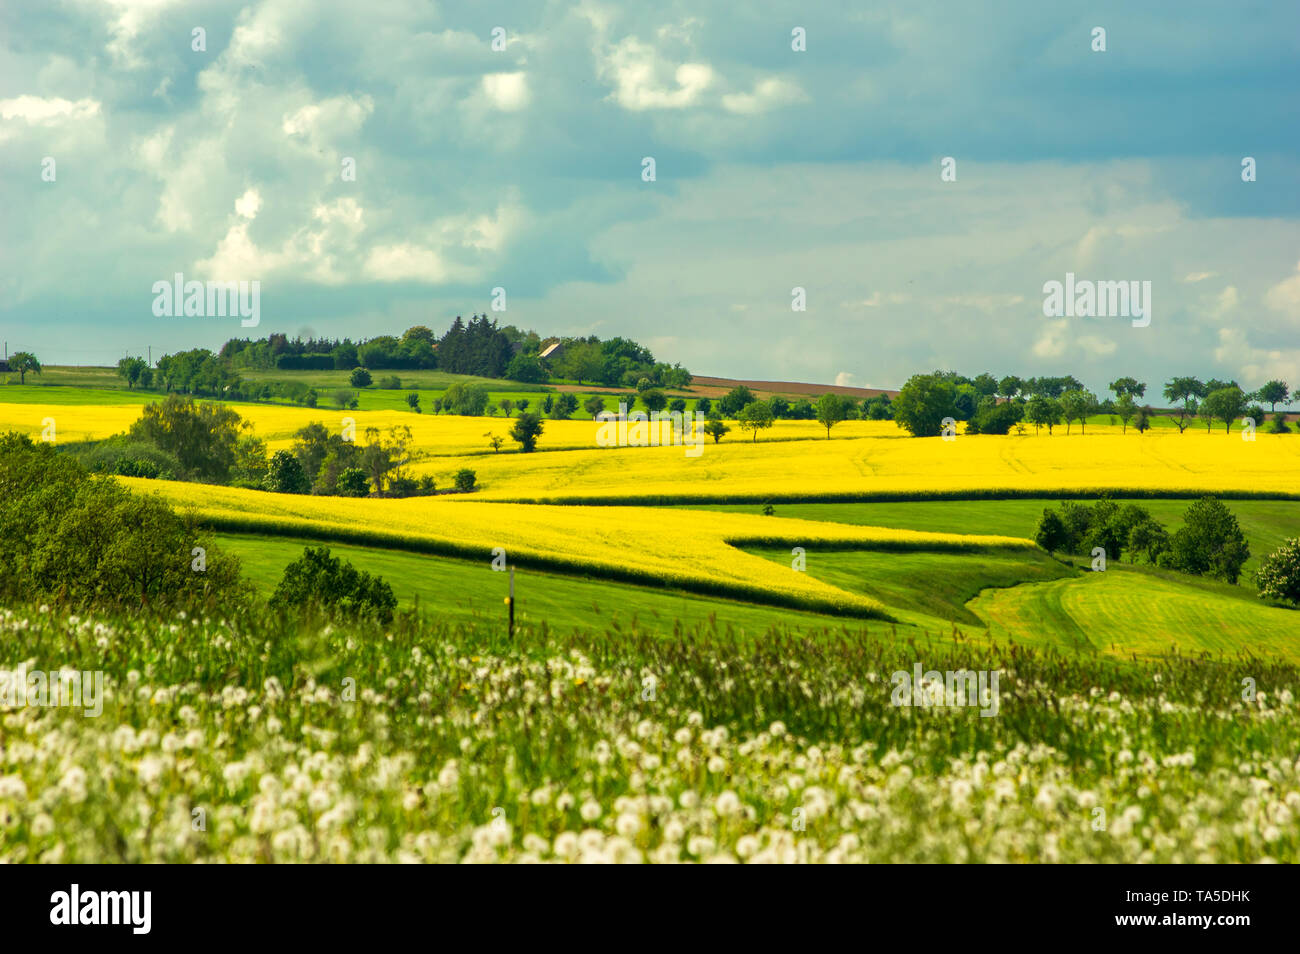 Scenic View of a yellow brassica rape seed field in the distance with ripe dandelion flower meadow in foreground Stock Photo